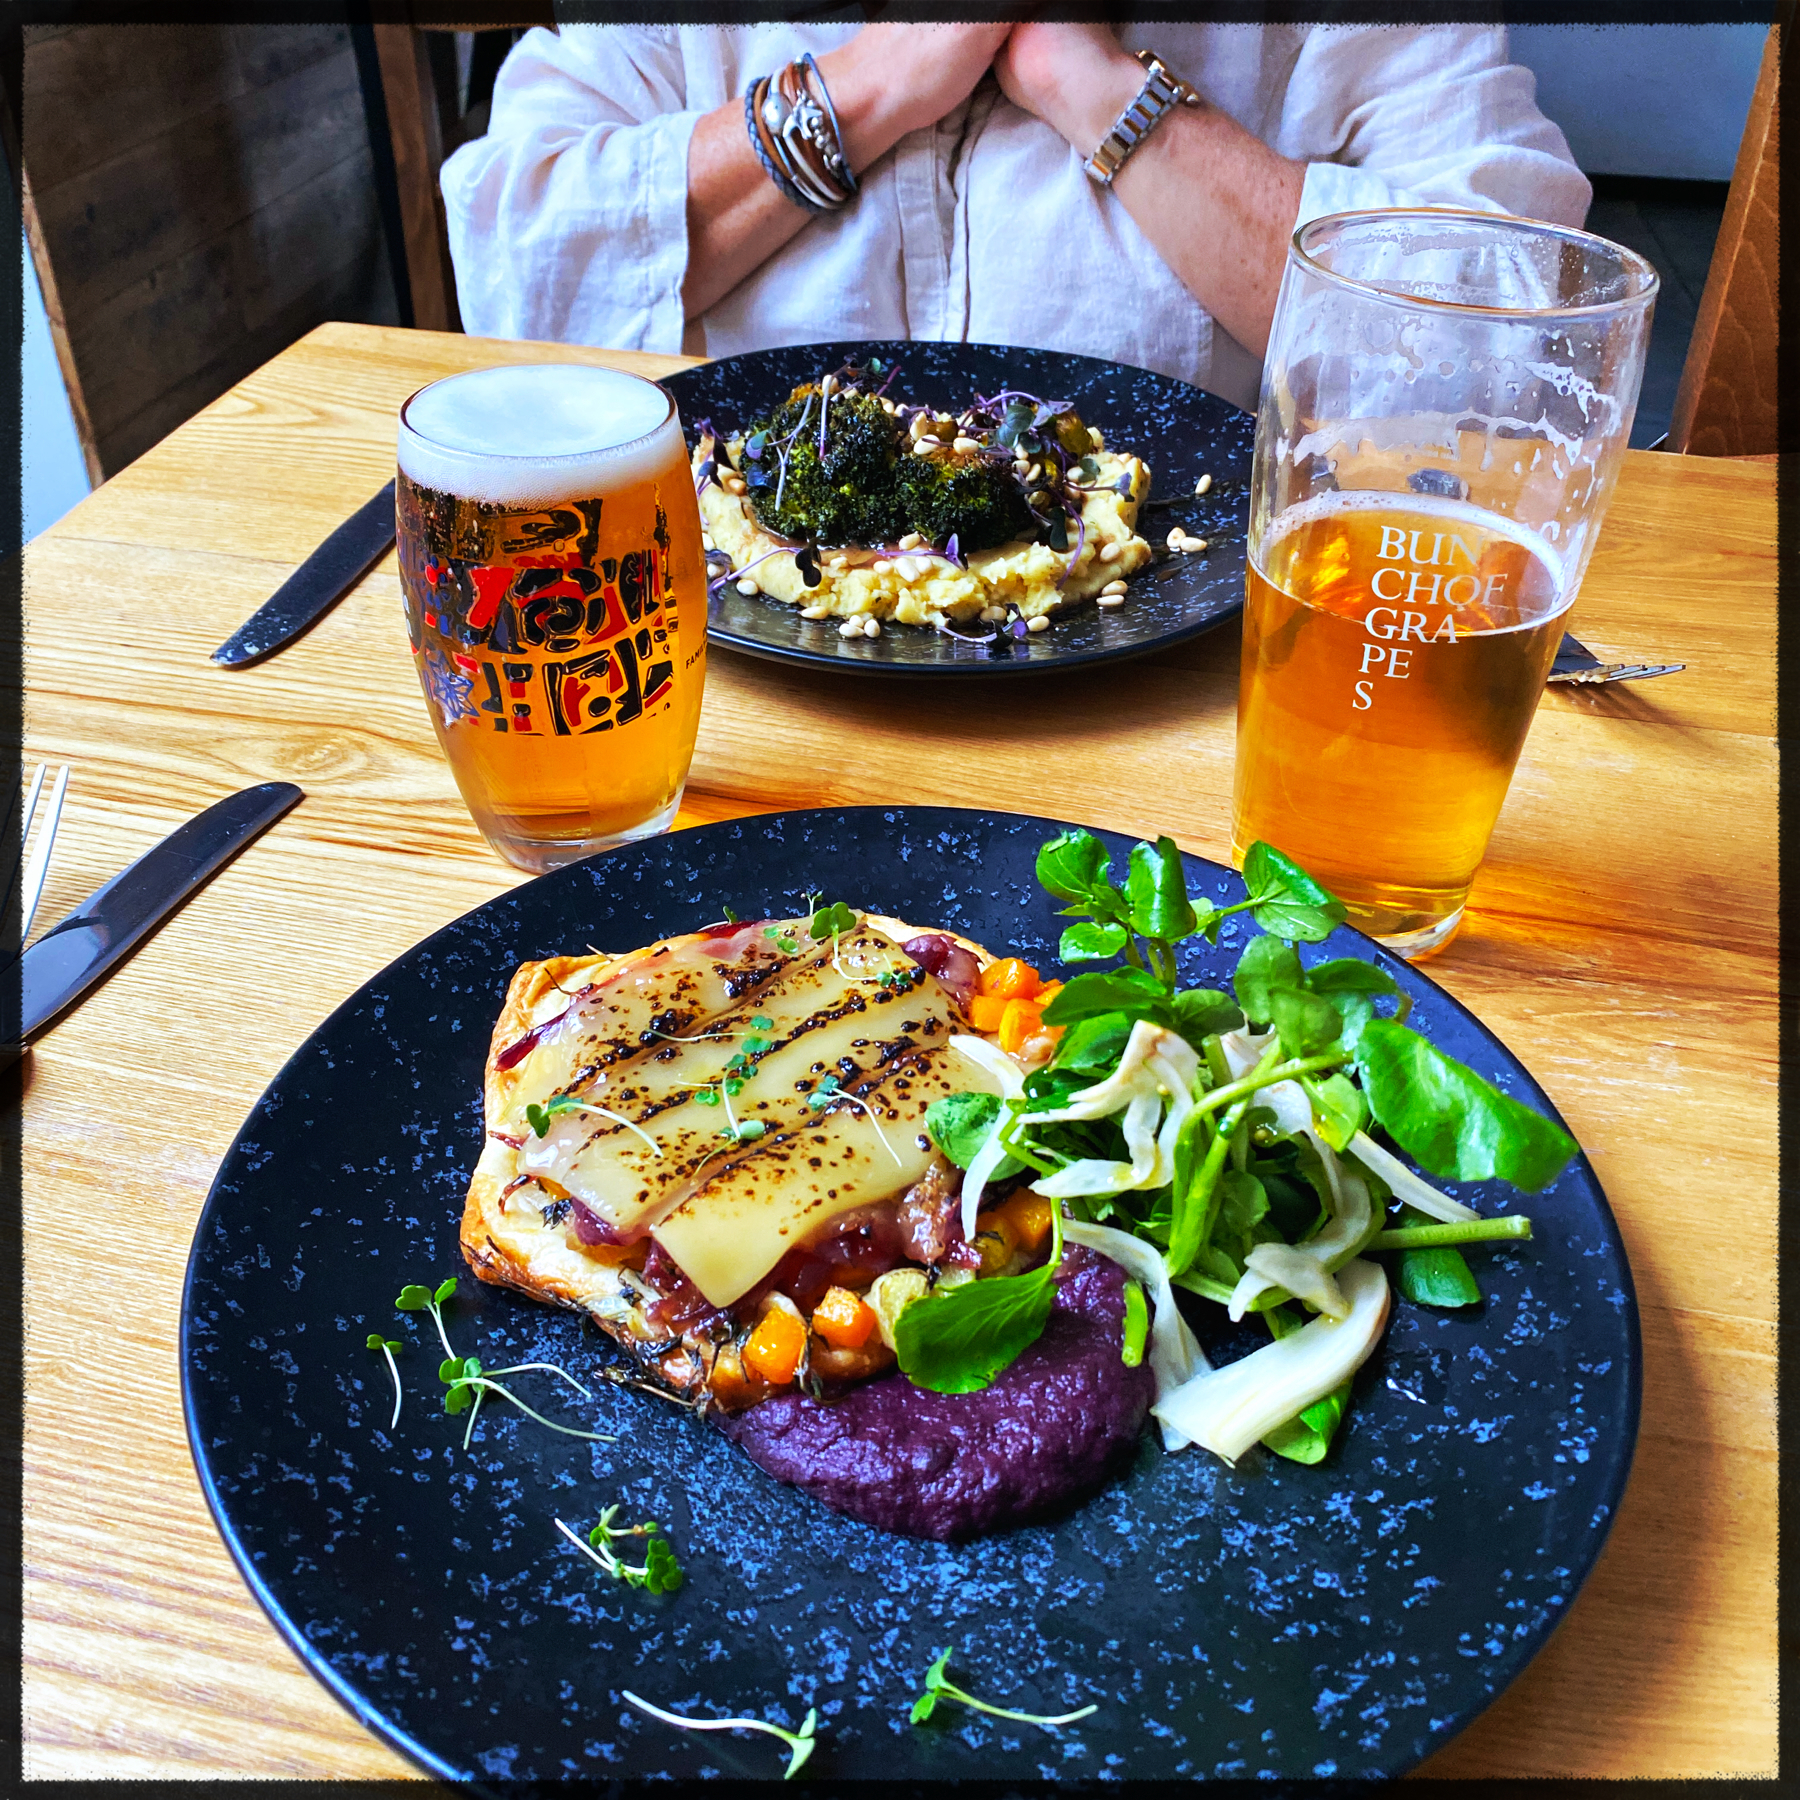 A wooden table setting at a restaurant with two plates of gourmet food and two glasses of beer. The foreground plate features a dish with cheese, a vegetable tart, and a side salad; the background plate has a different dish topped with grilled broccoli.